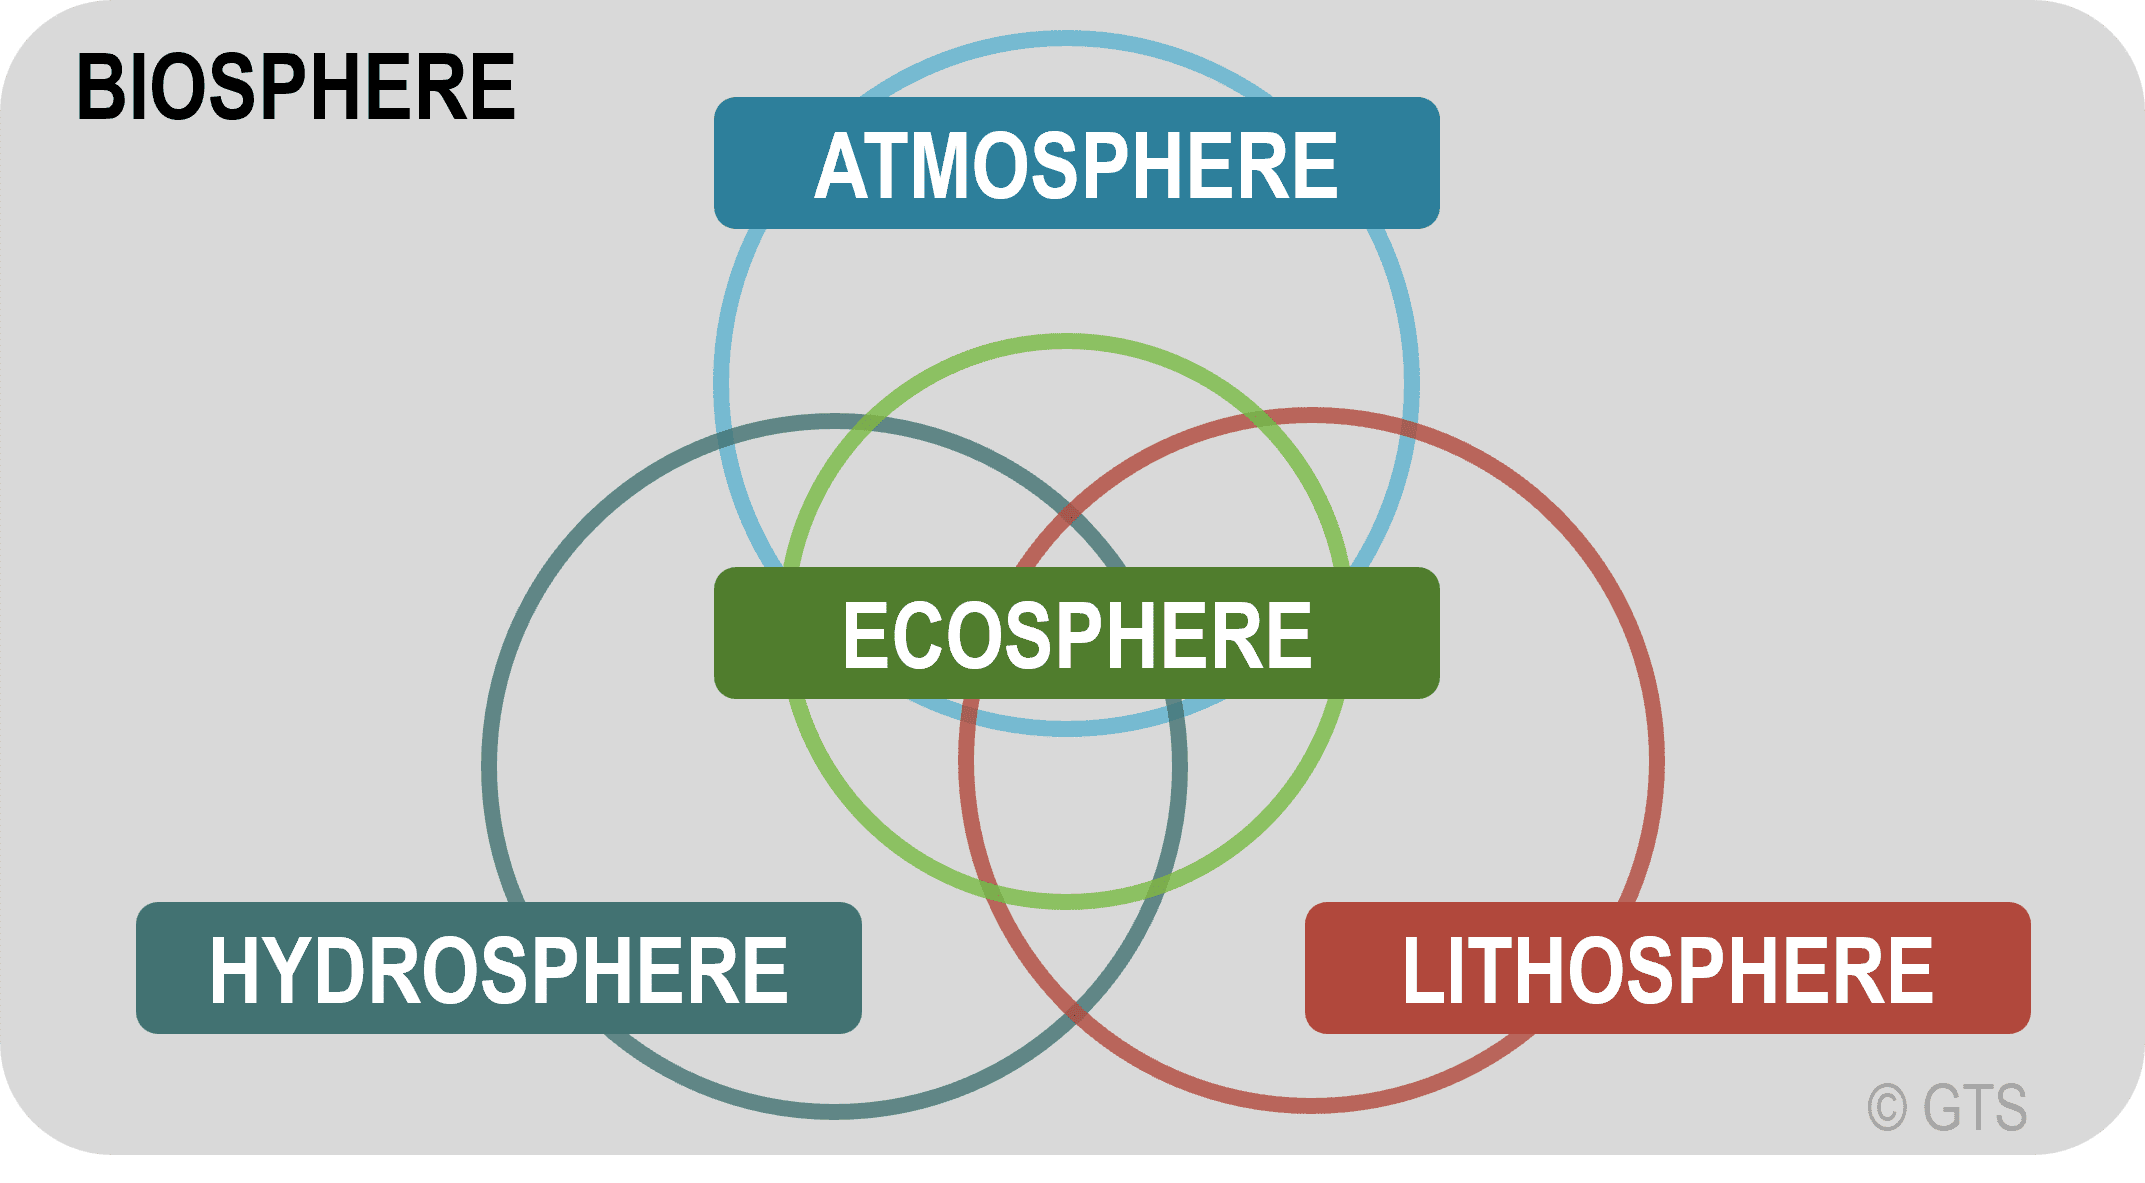 mixtures in the lithosphere